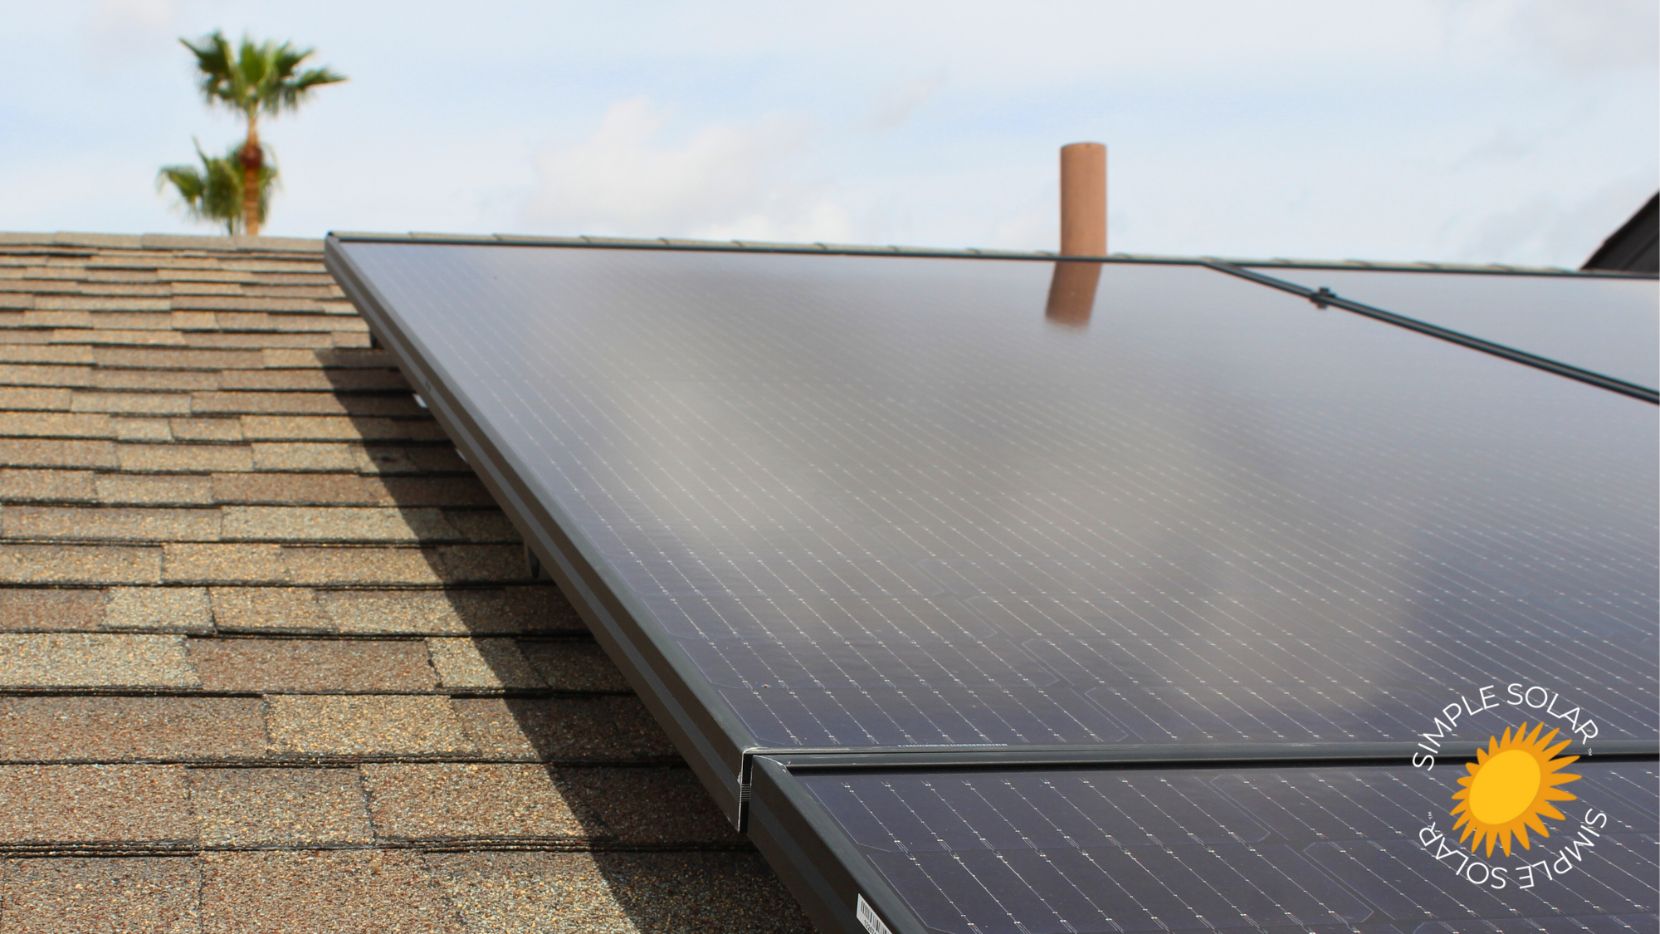 How Much Do Solar Panels Increase Your Home’s Value?